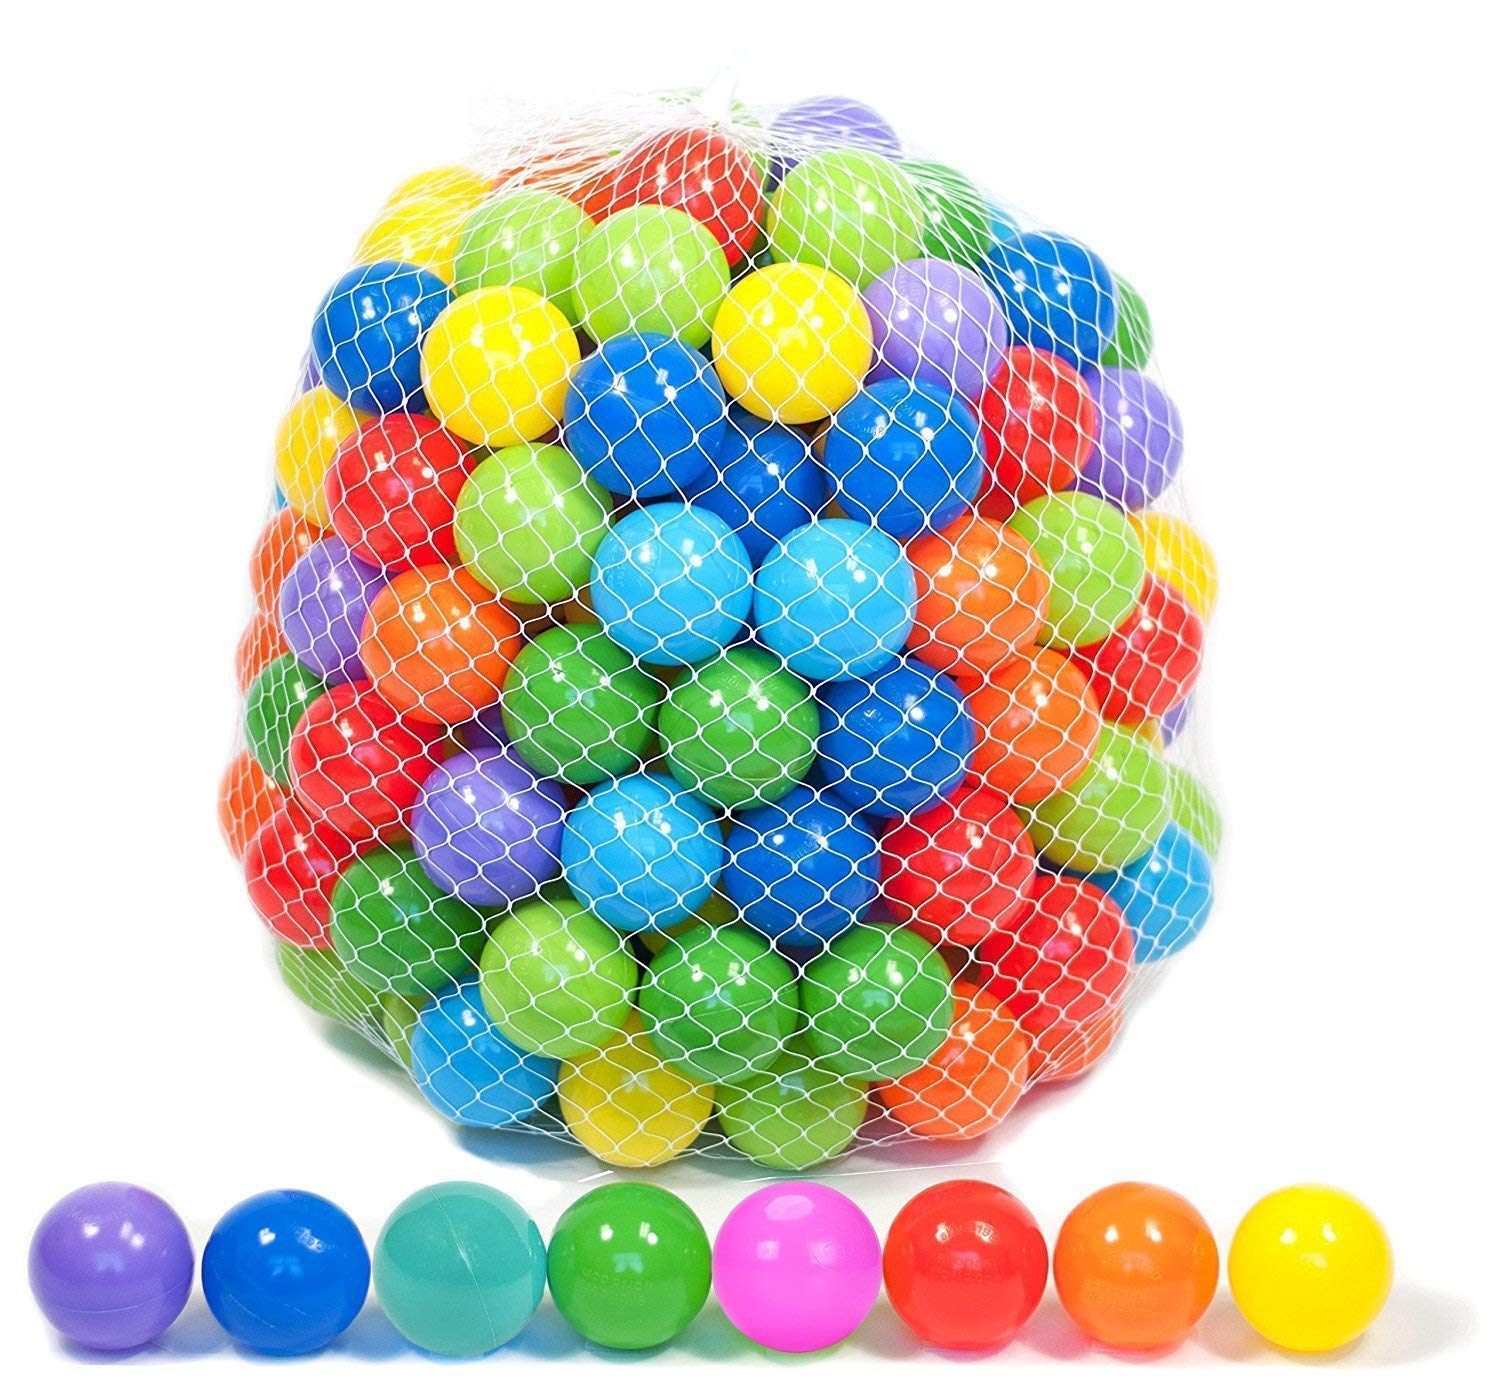 Playz 50 Soft Plastic Mini Ball Pit Balls w/ 8 Vibrant Colors - Crush Proof, Non Toxic, Safe Assorted Bulk Plastic Balls for Toddler, Baby & Kids Playpen, Play Tents Indoor & Outdoor Playtime Fun